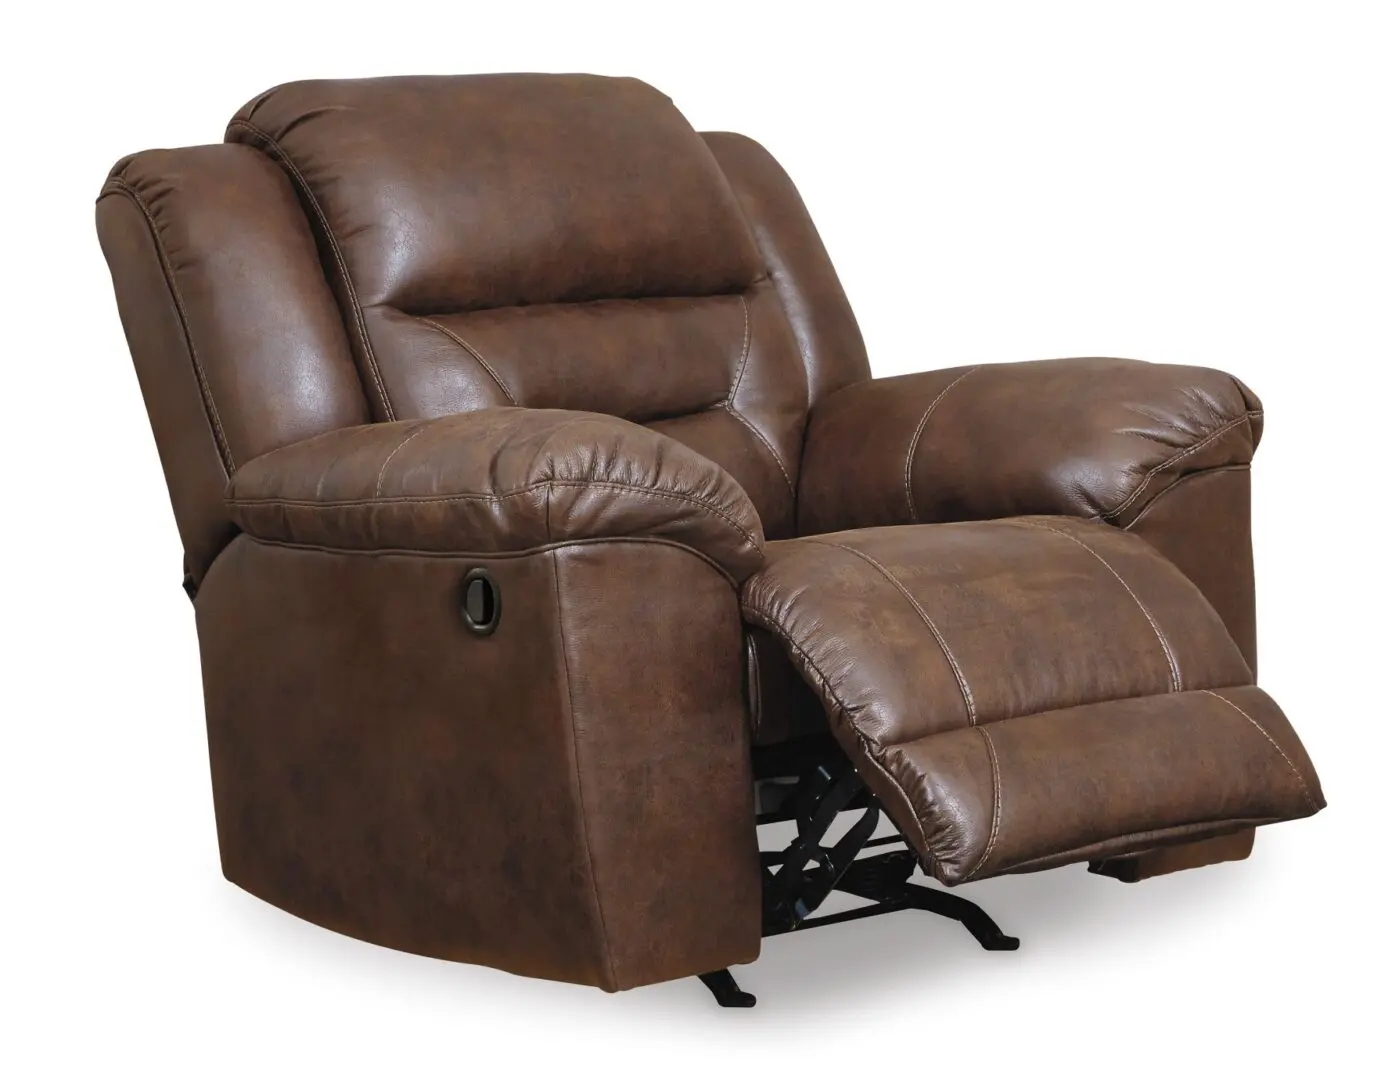 A brown leather recliner chair with two pillows.